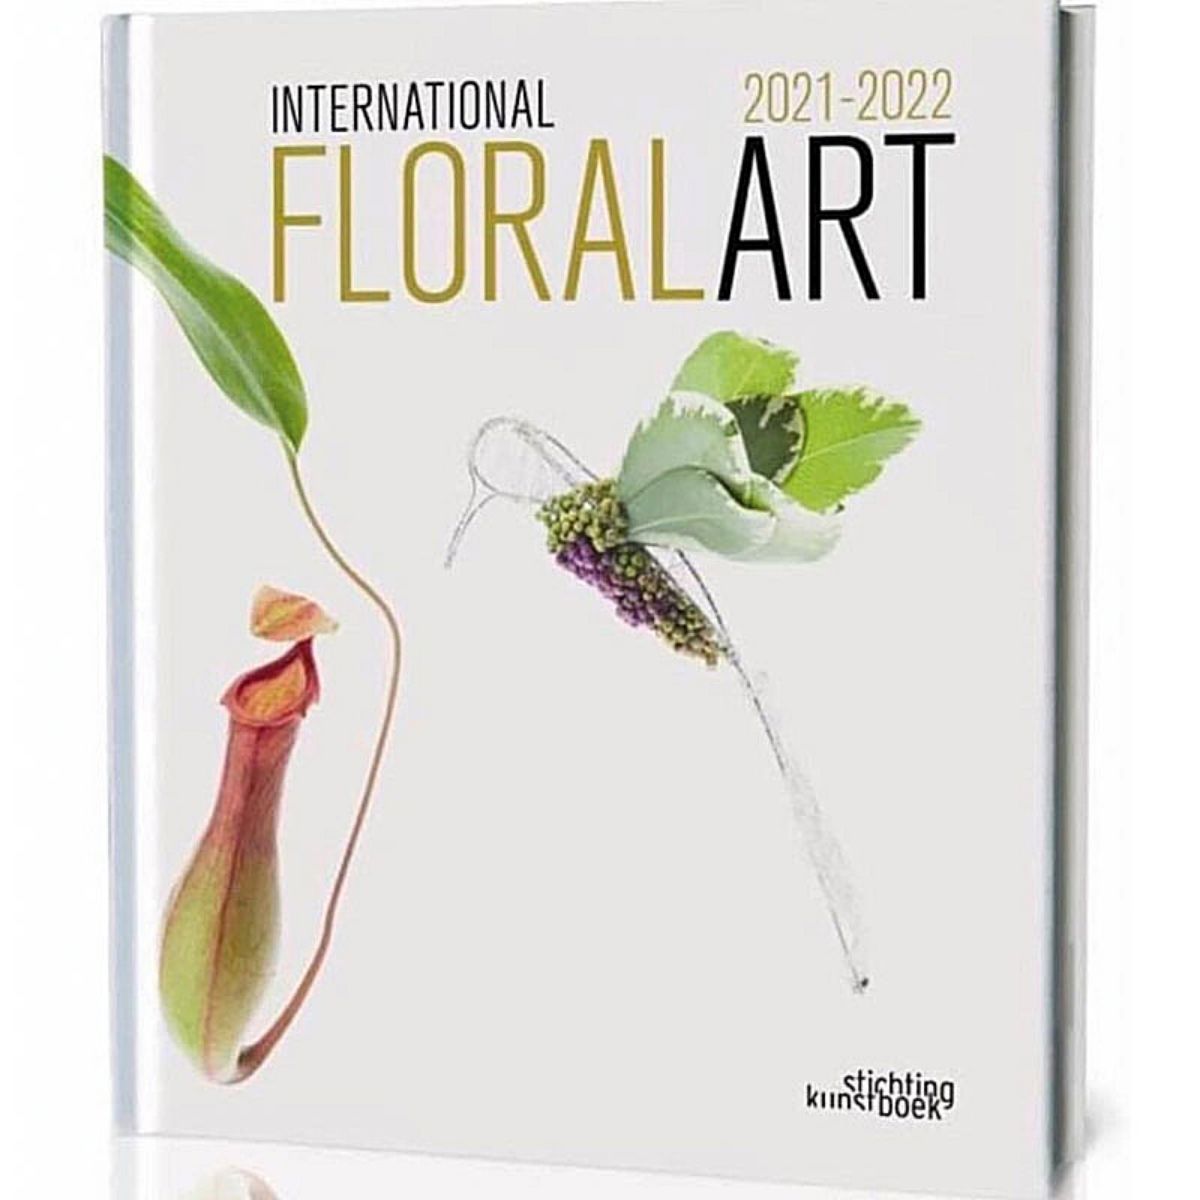 A Floral Interview With Teresa Skues, Designer of the Cover of International Floral Art 2021-2022